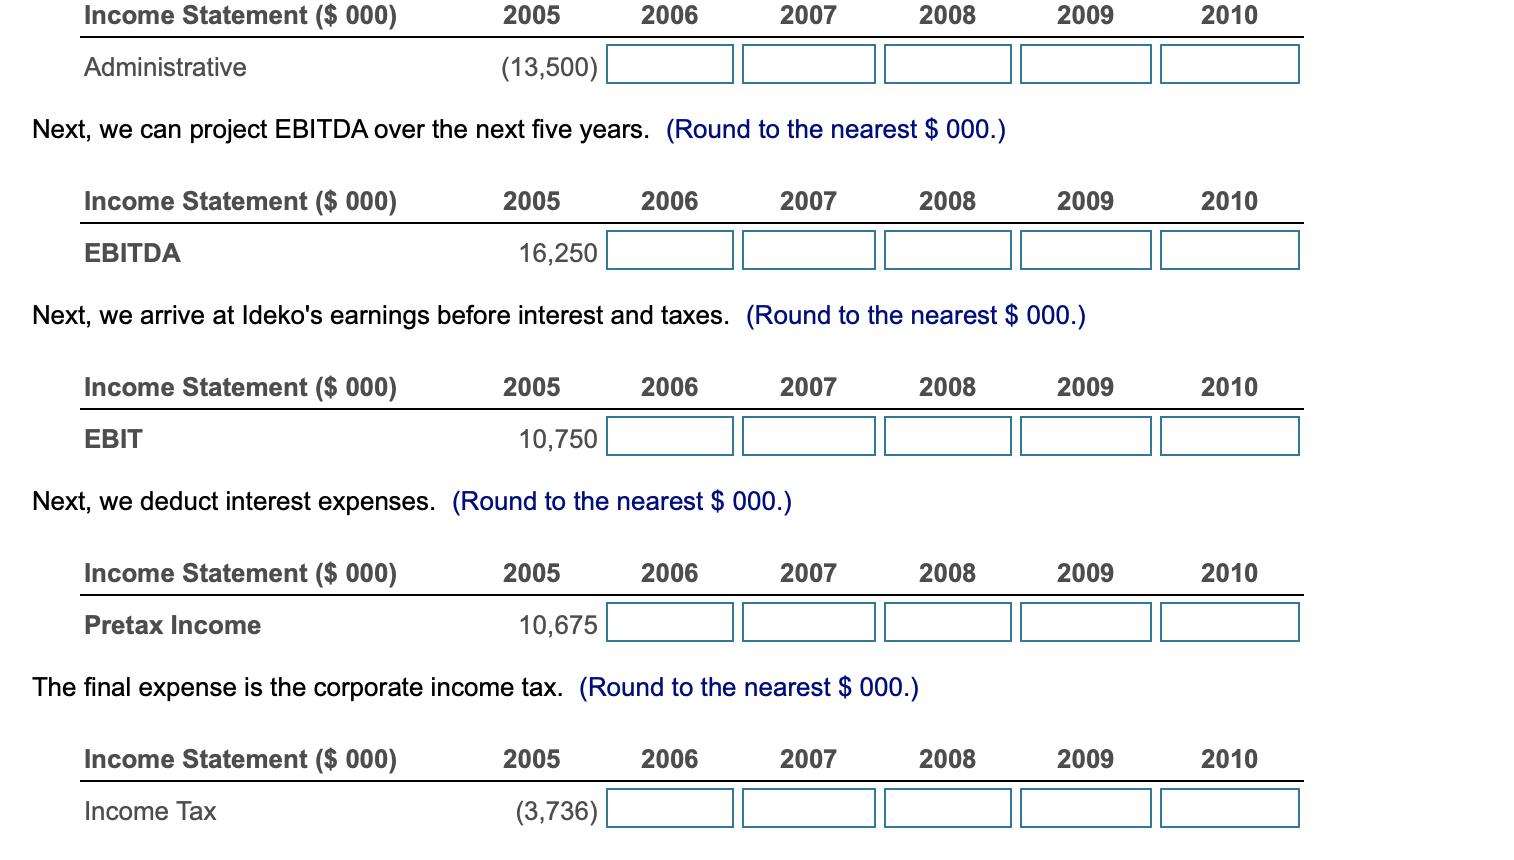 Income Statement ($ 000) 2005 (13,500) Next, we can project EBITDA over the next five years. (Round to the